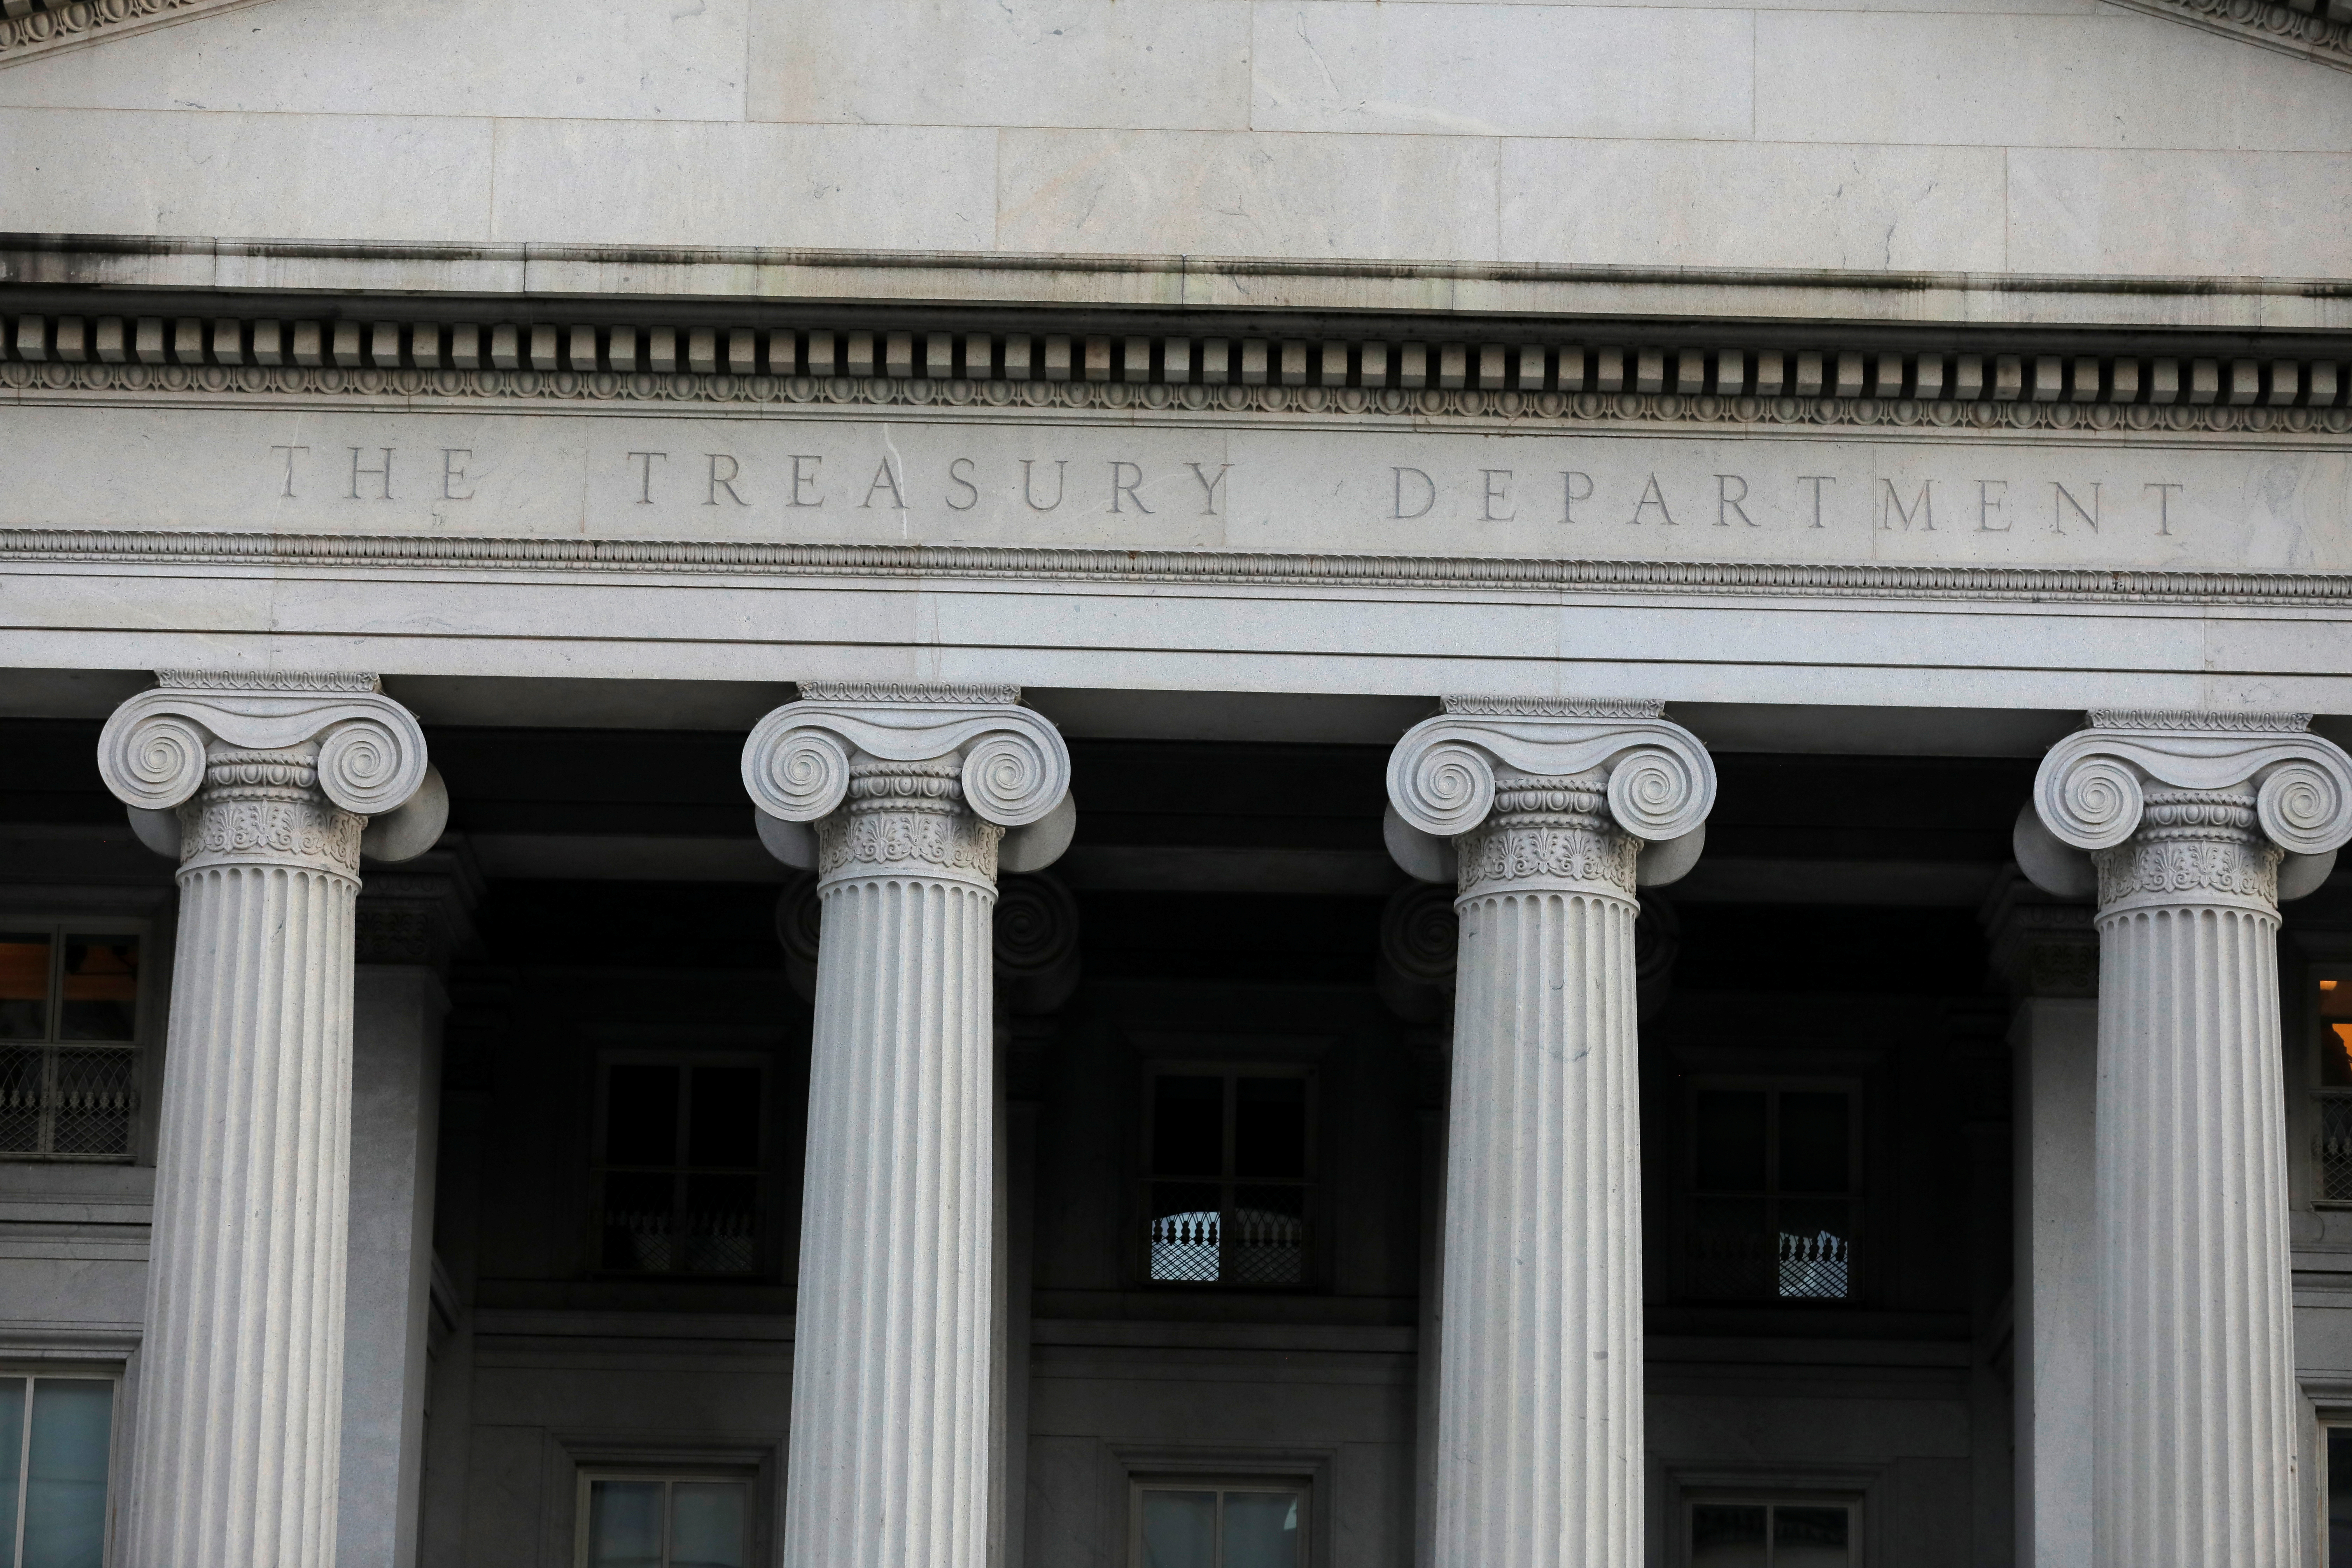 The United States Department of the Treasury is seen in Washington, D.C., U.S., August 30, 2020. REUTERS/Andrew Kelly/File Photo